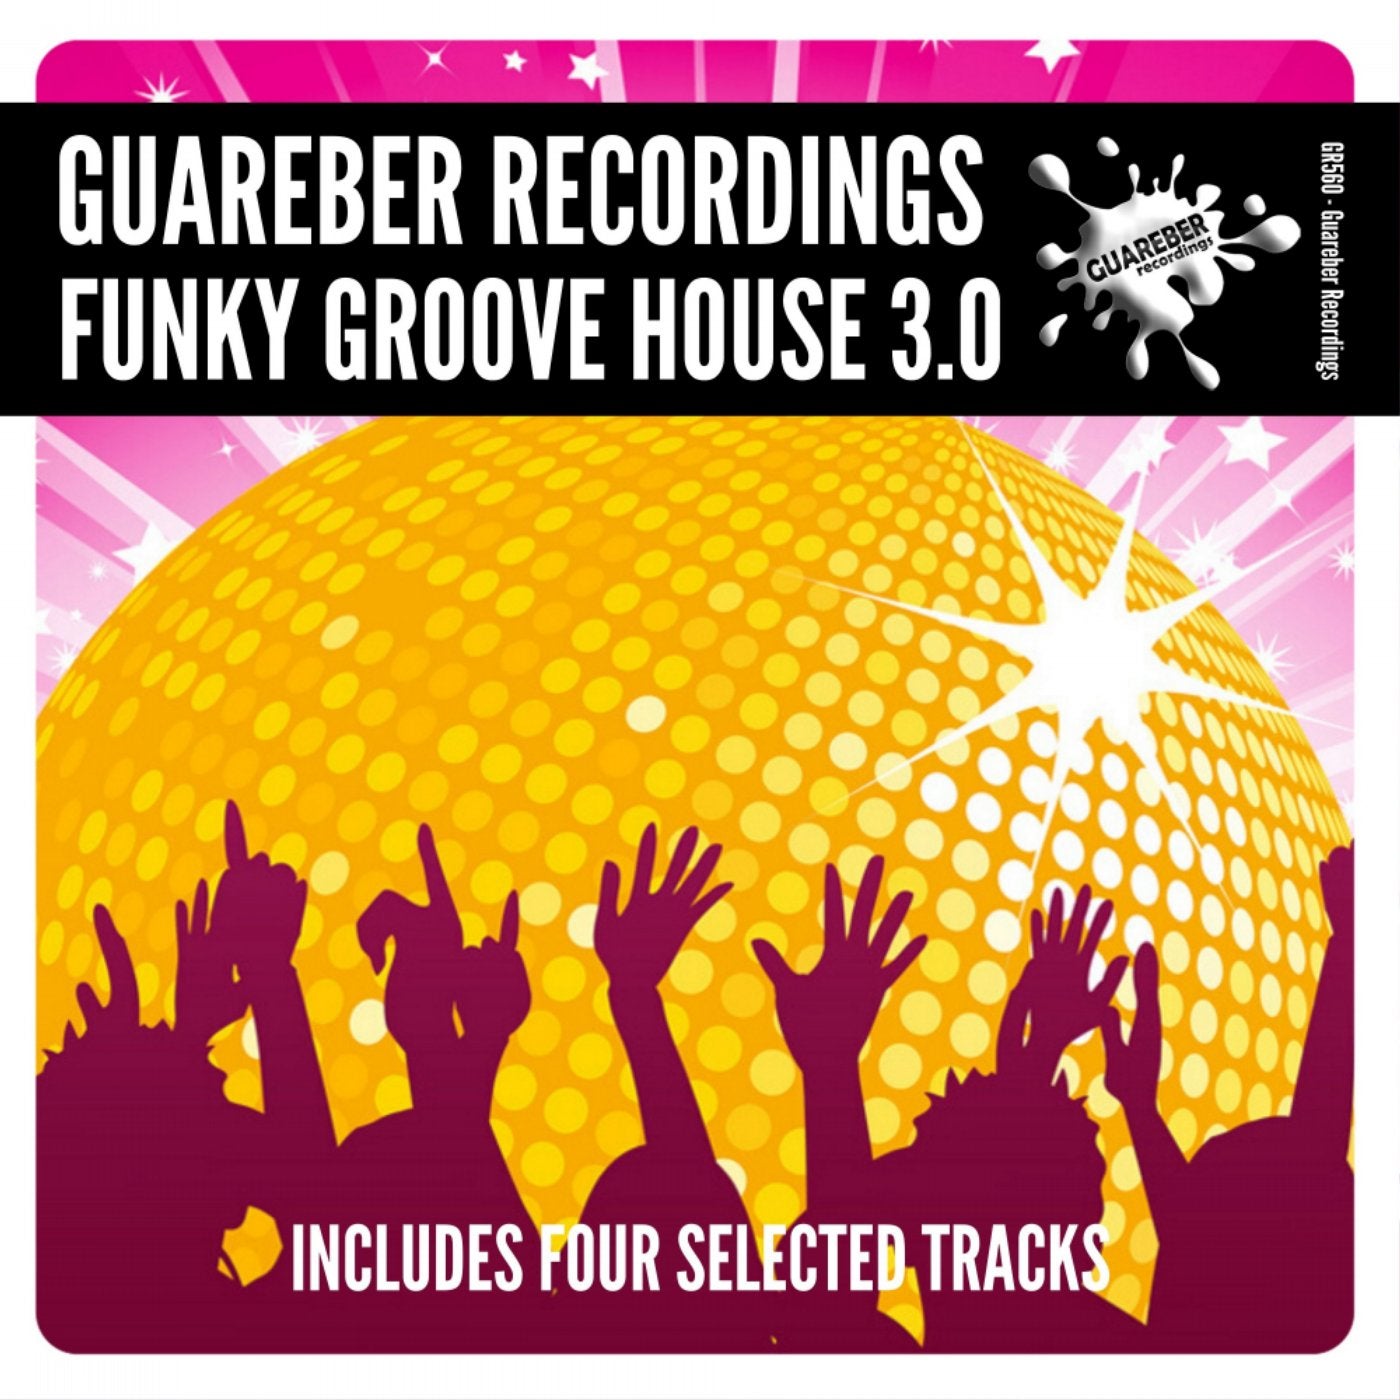 Guareber Recordings Funky Groove House 3.0